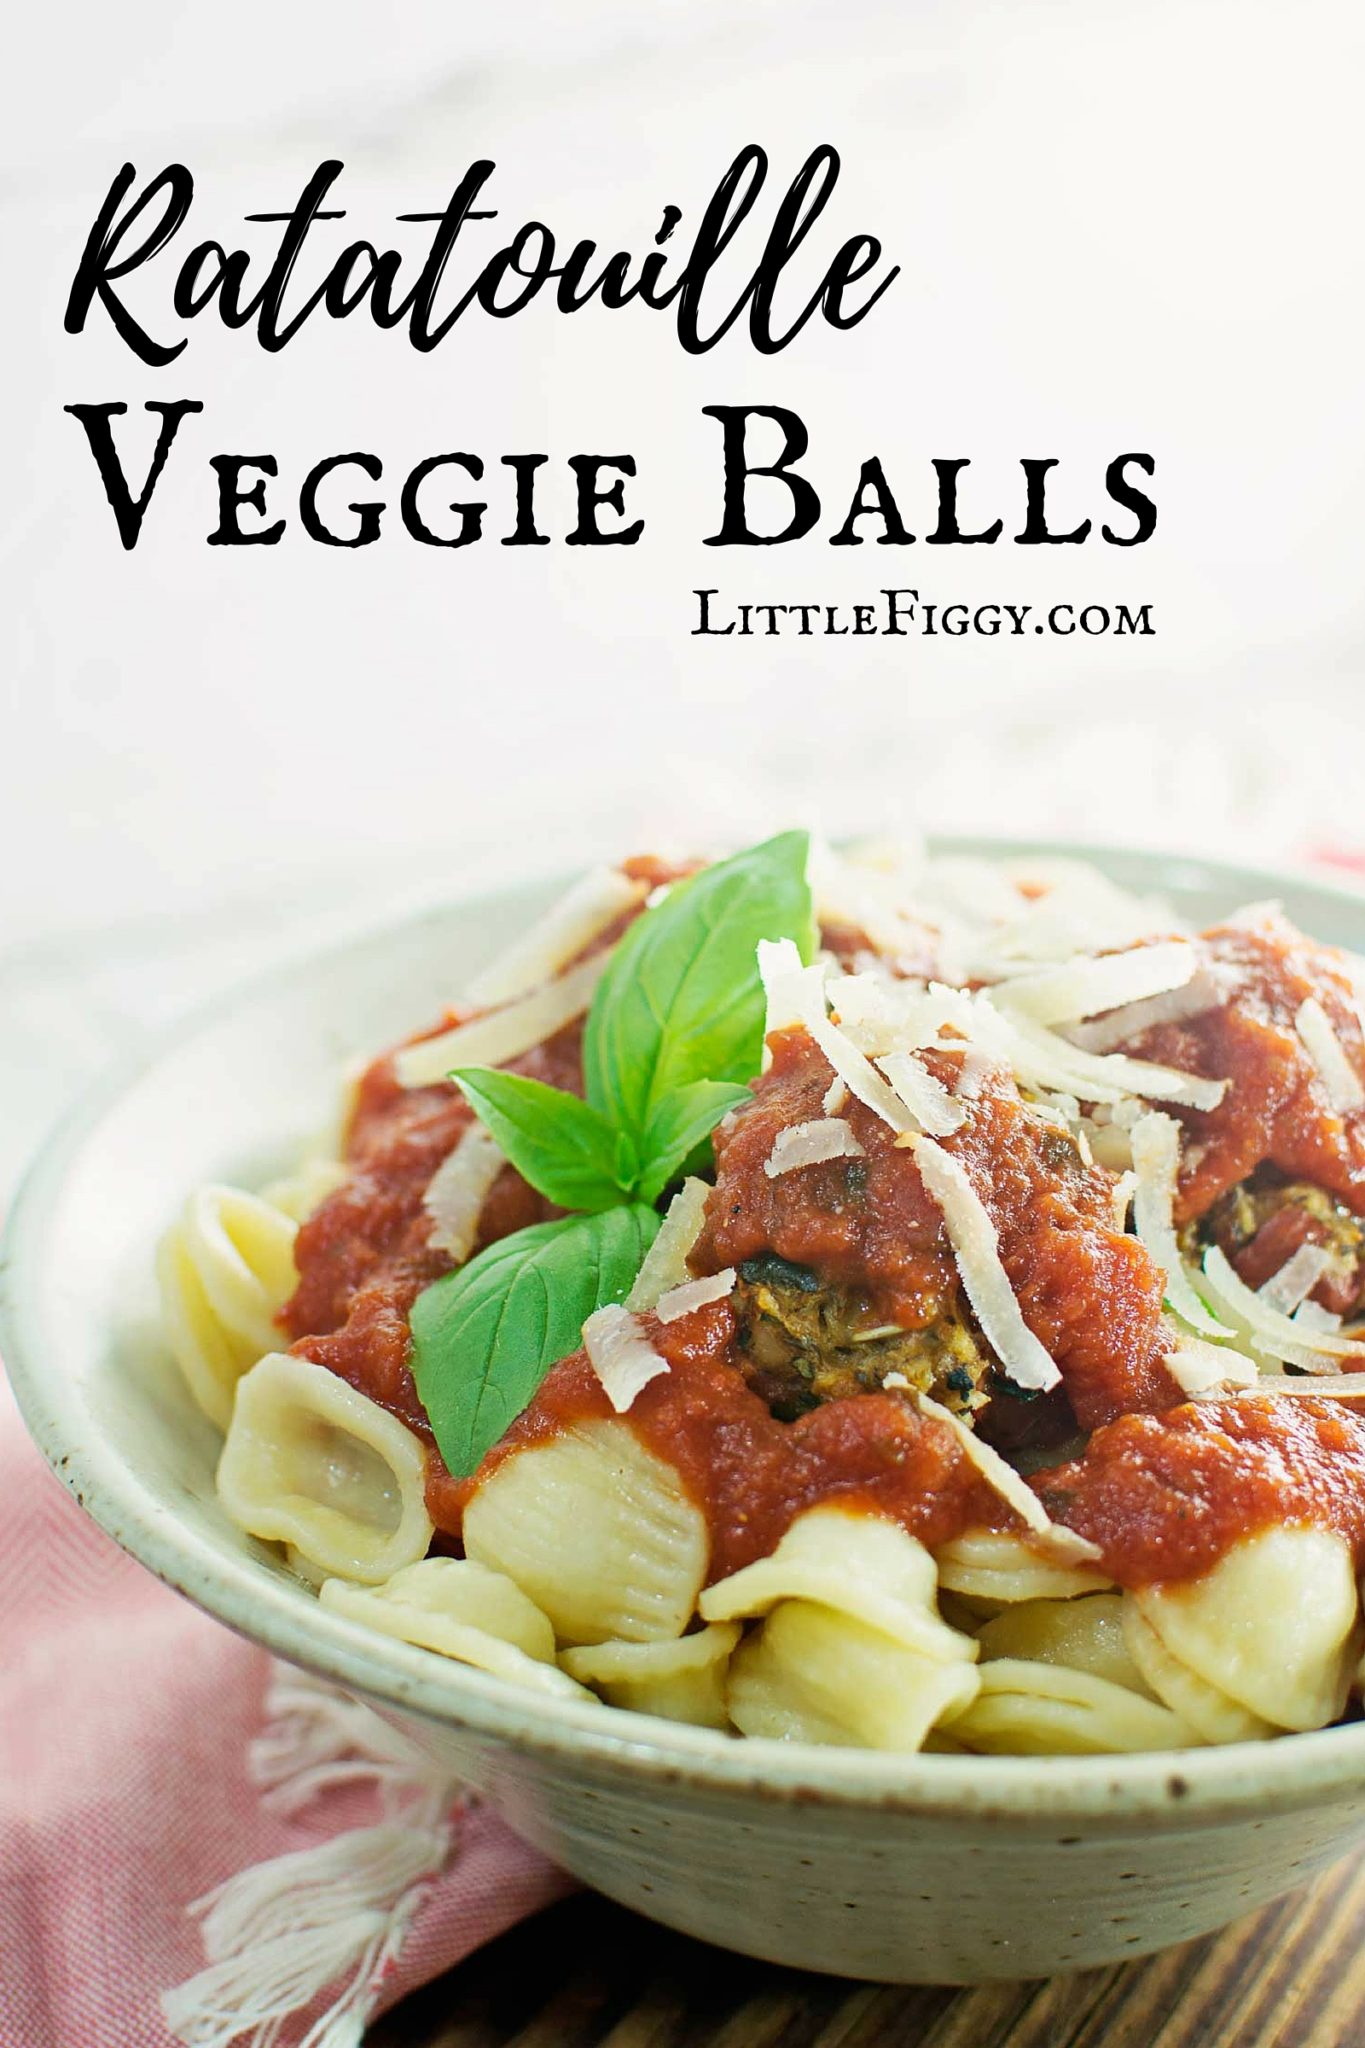 For a meatless alternative to the beloved meatballs, try these Ratatouille inspired Veggie Balls with your favorite sauce & pasta. Recipe found @LittleFiggyFood